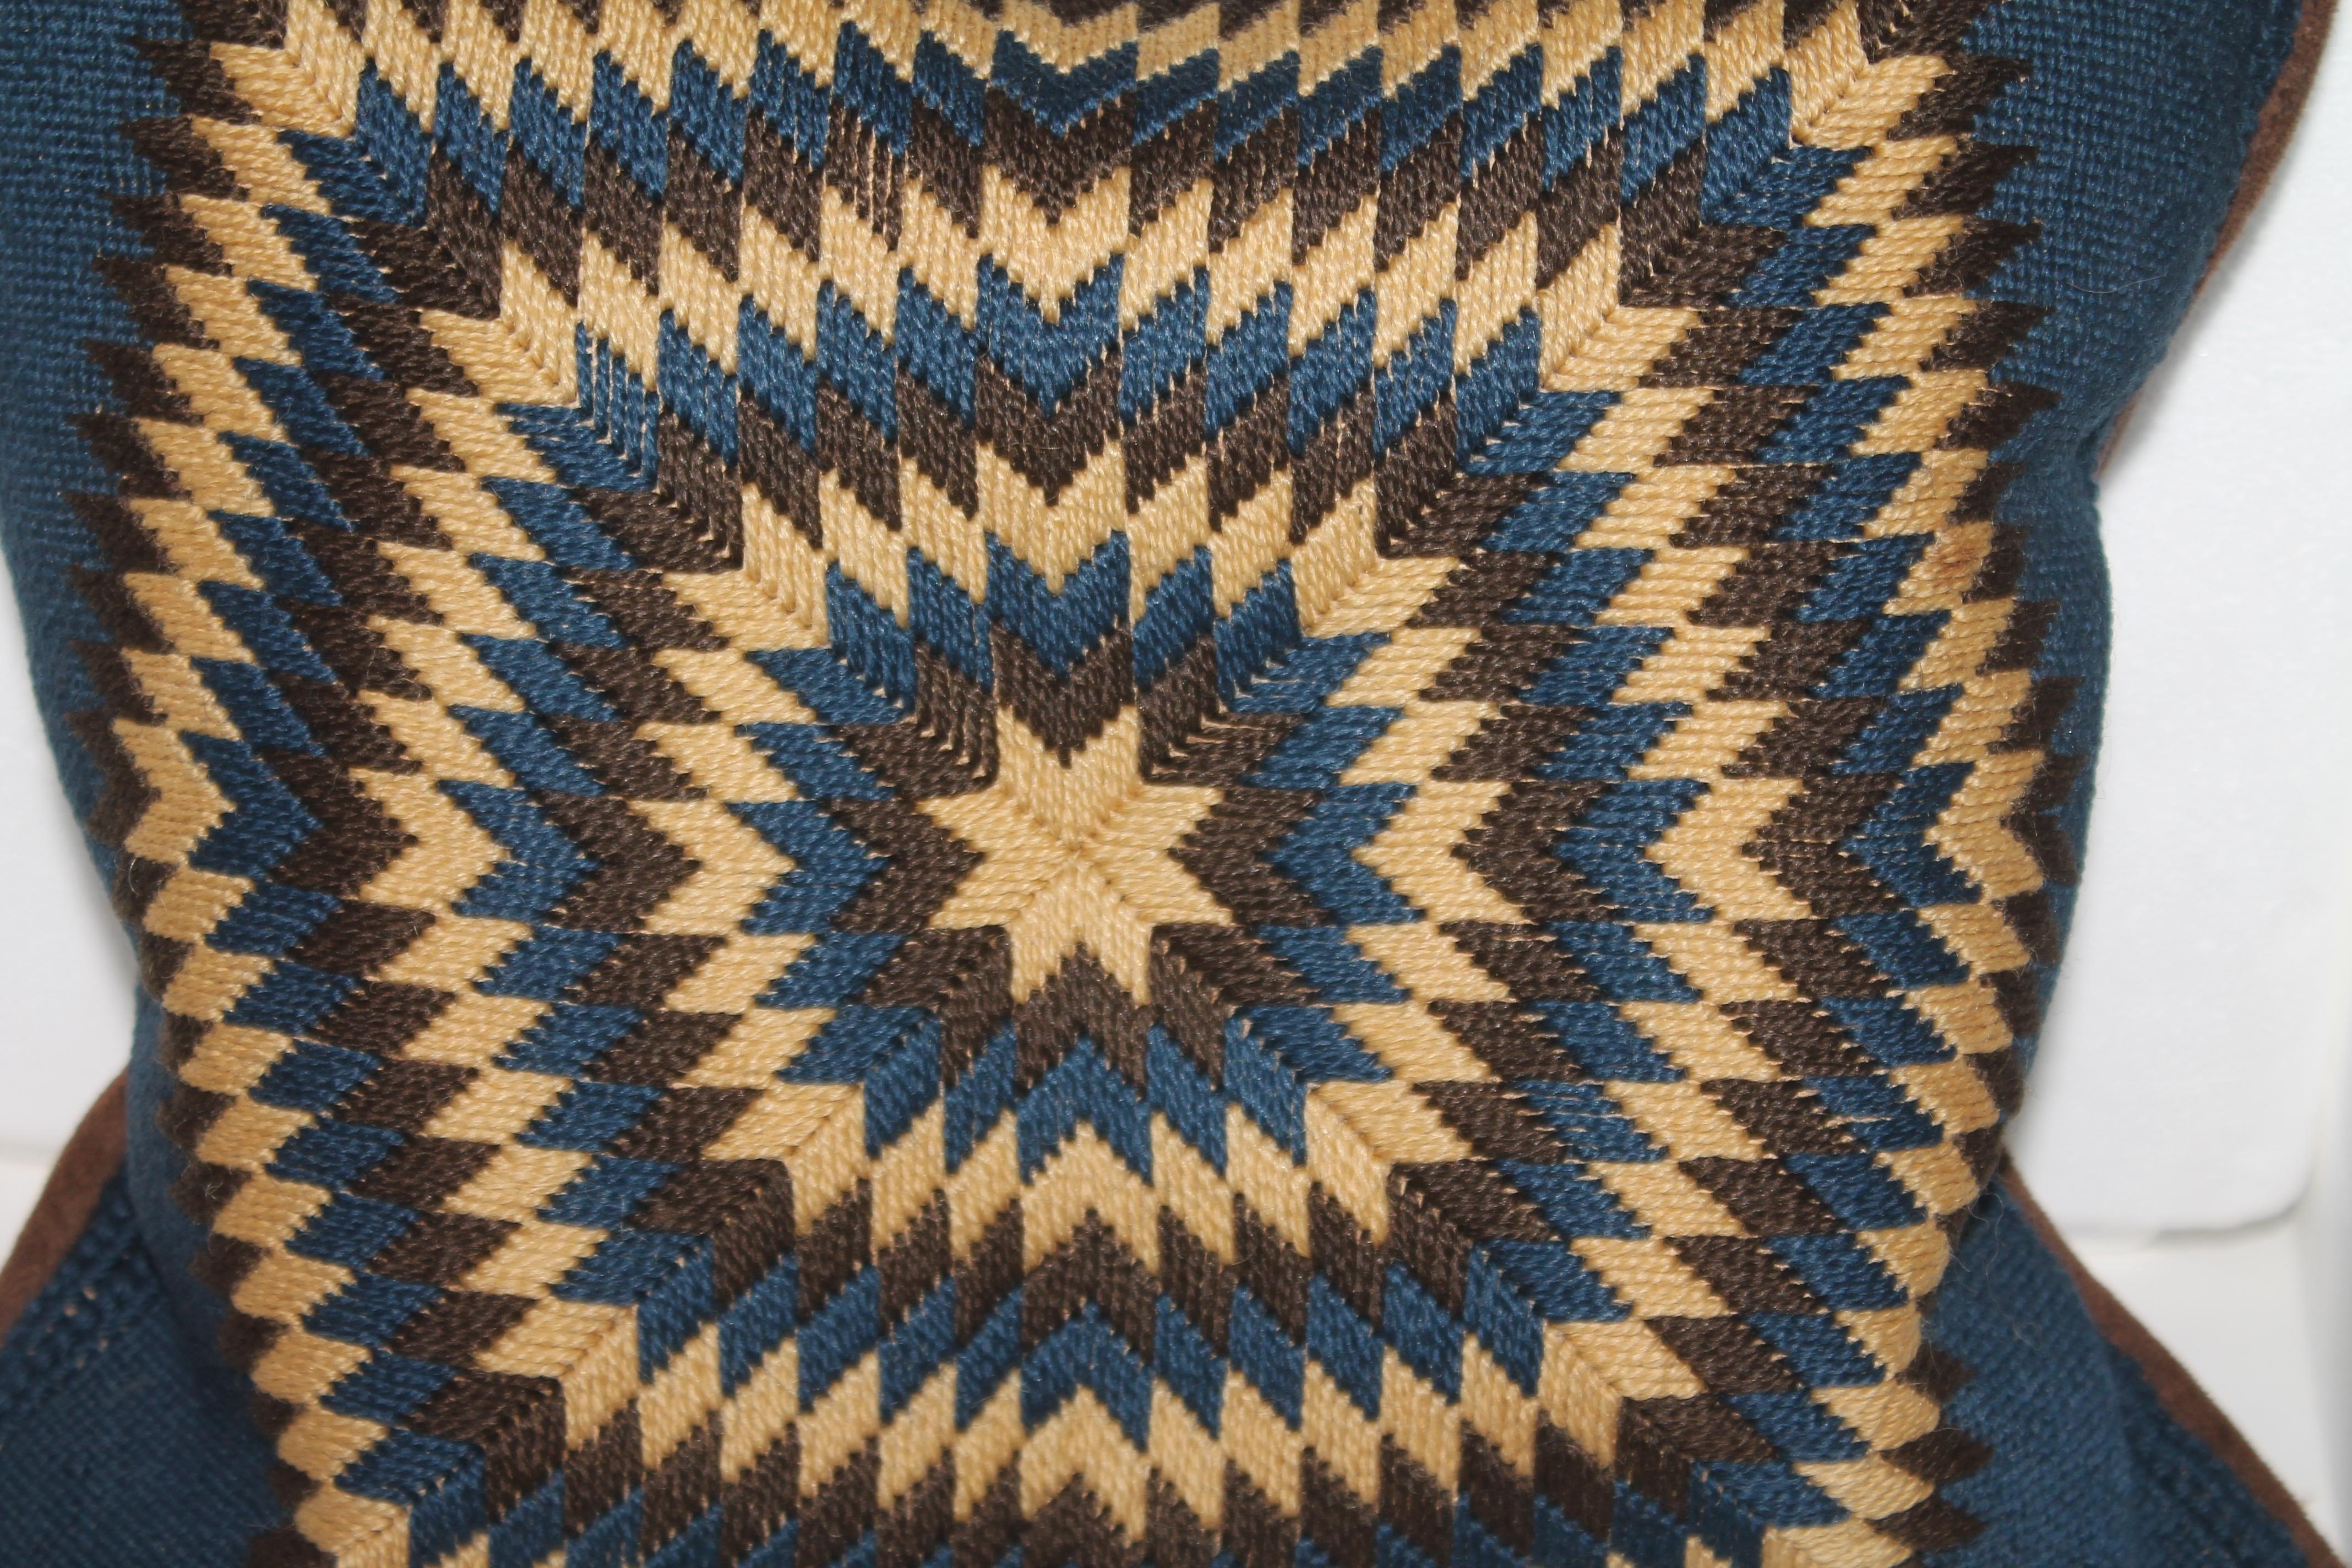 Early handwoven or knit starburst pillow. The backing is in a vintage velvet. The insert is down & feather fill.